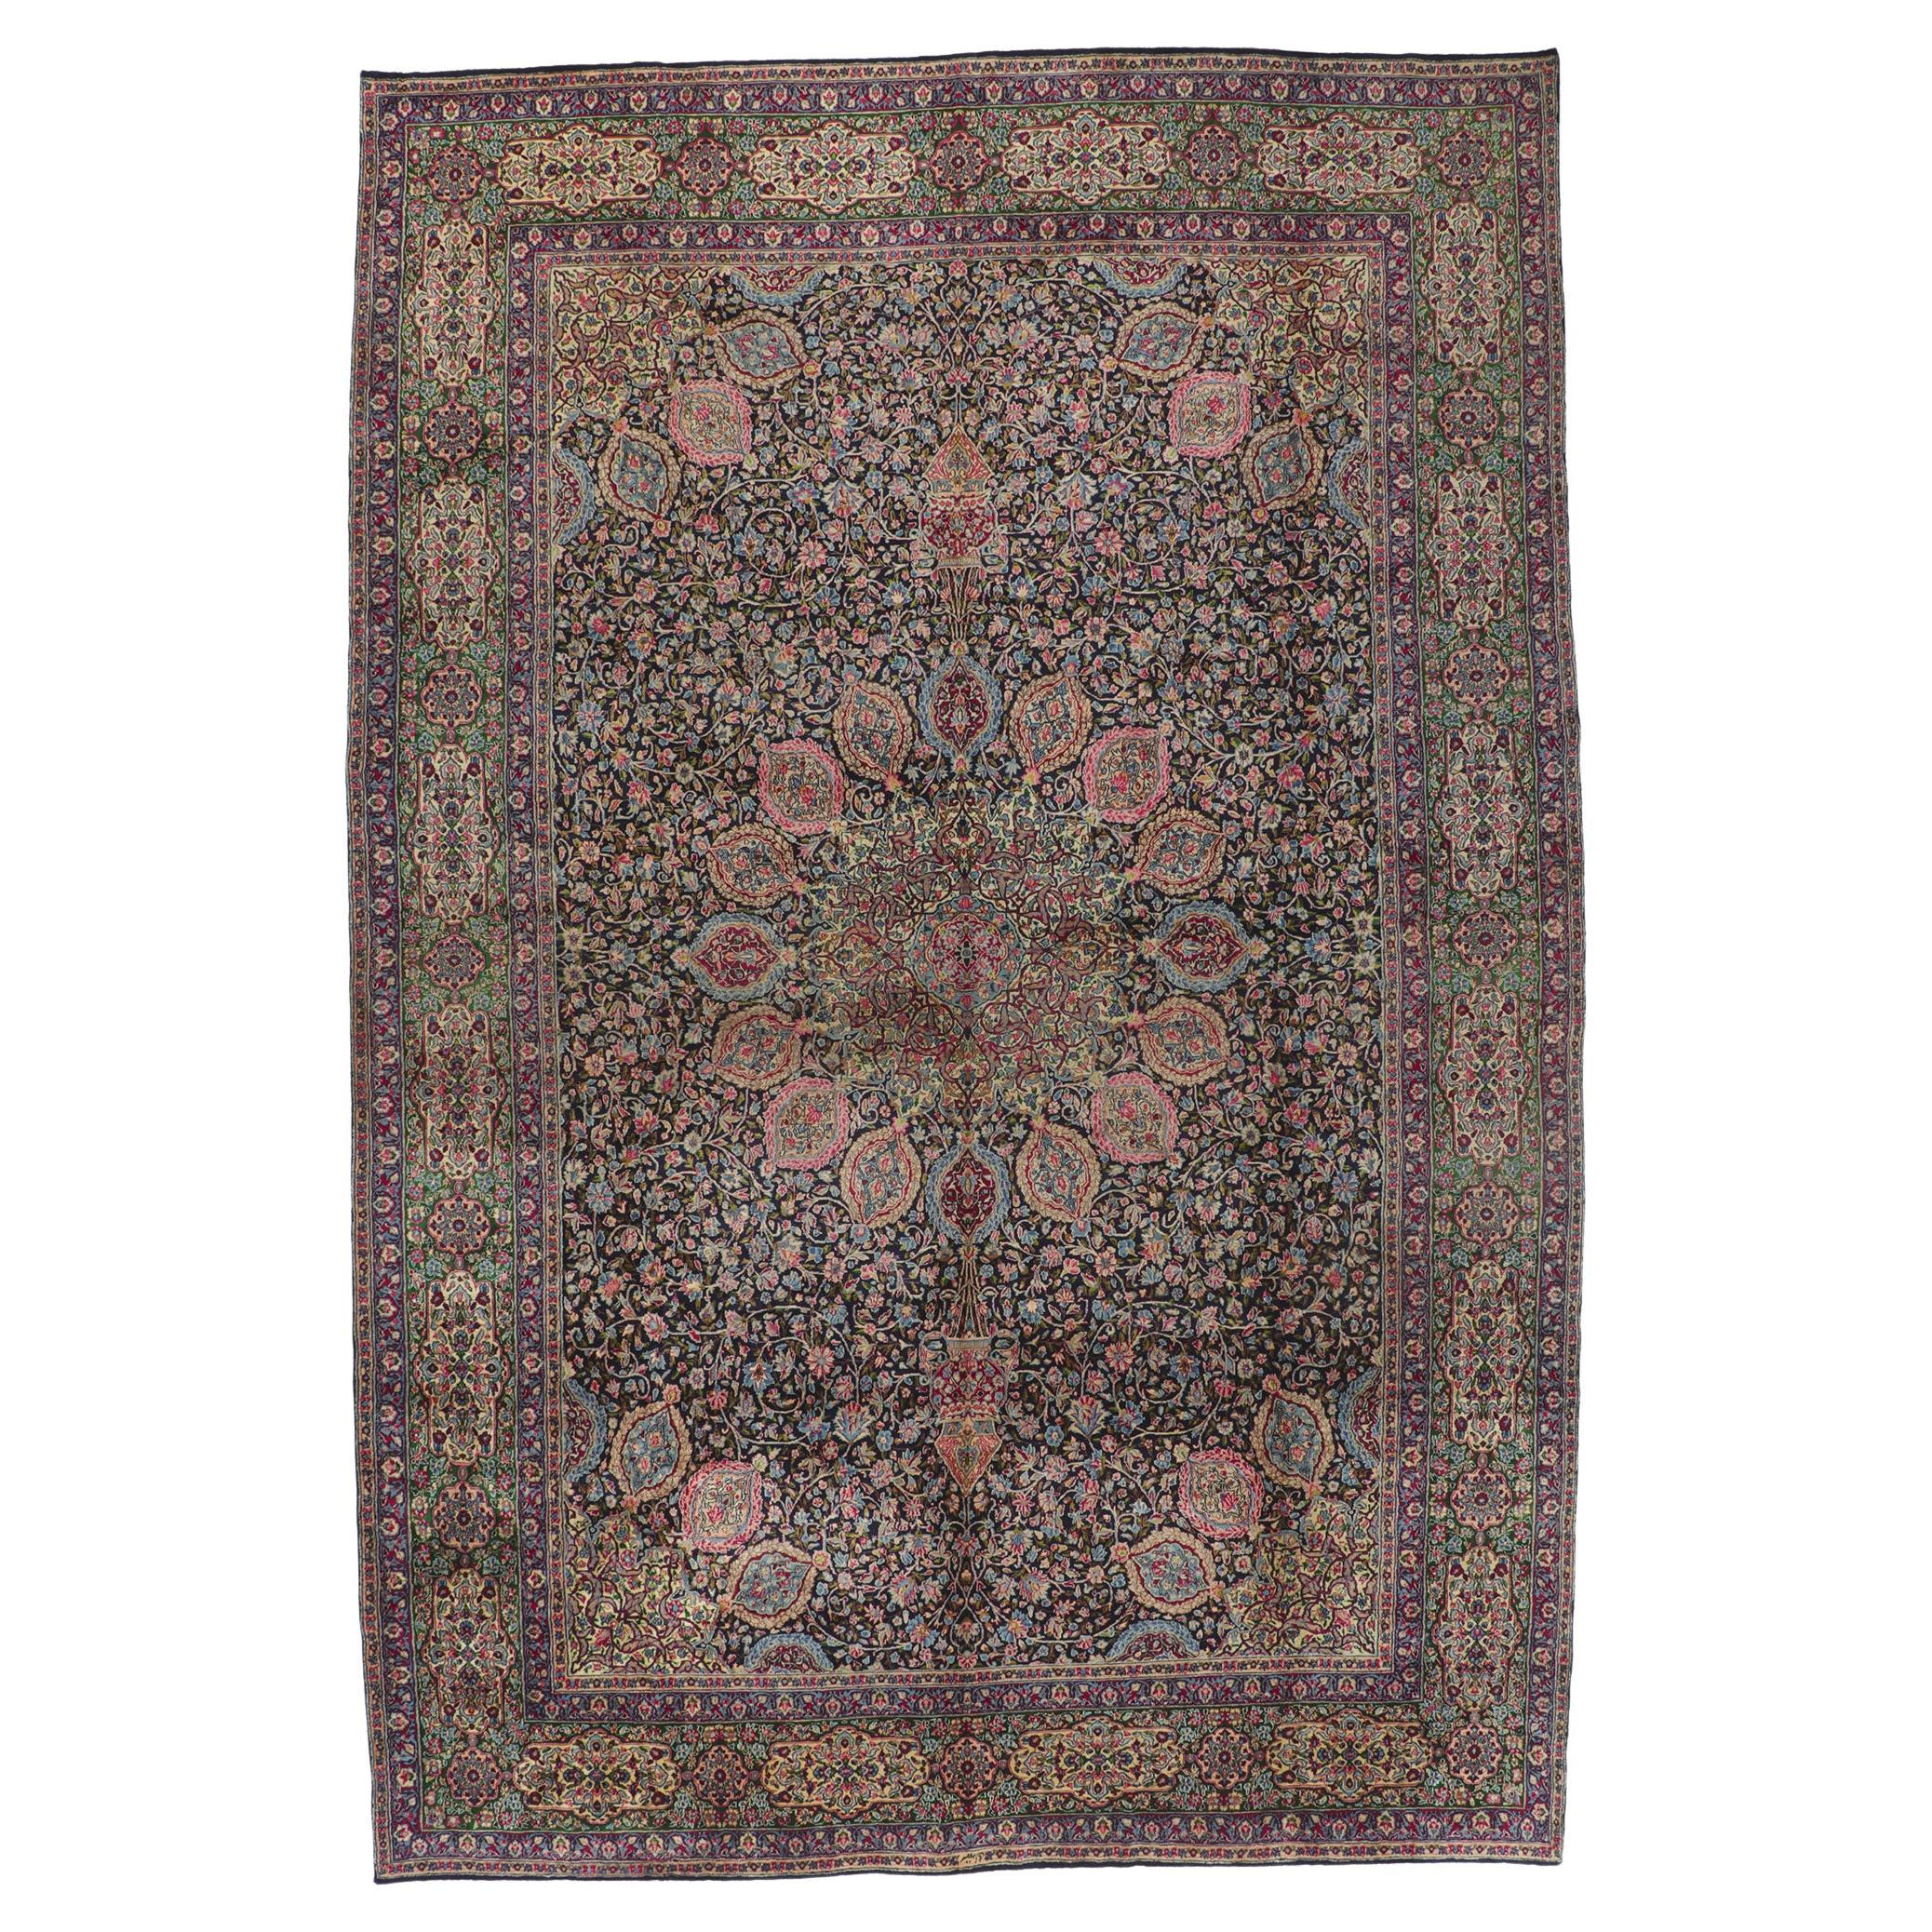 Vintage Persian Kerman Rug with The Ardabil Carpet Design, Hotel Lobby Size Rug